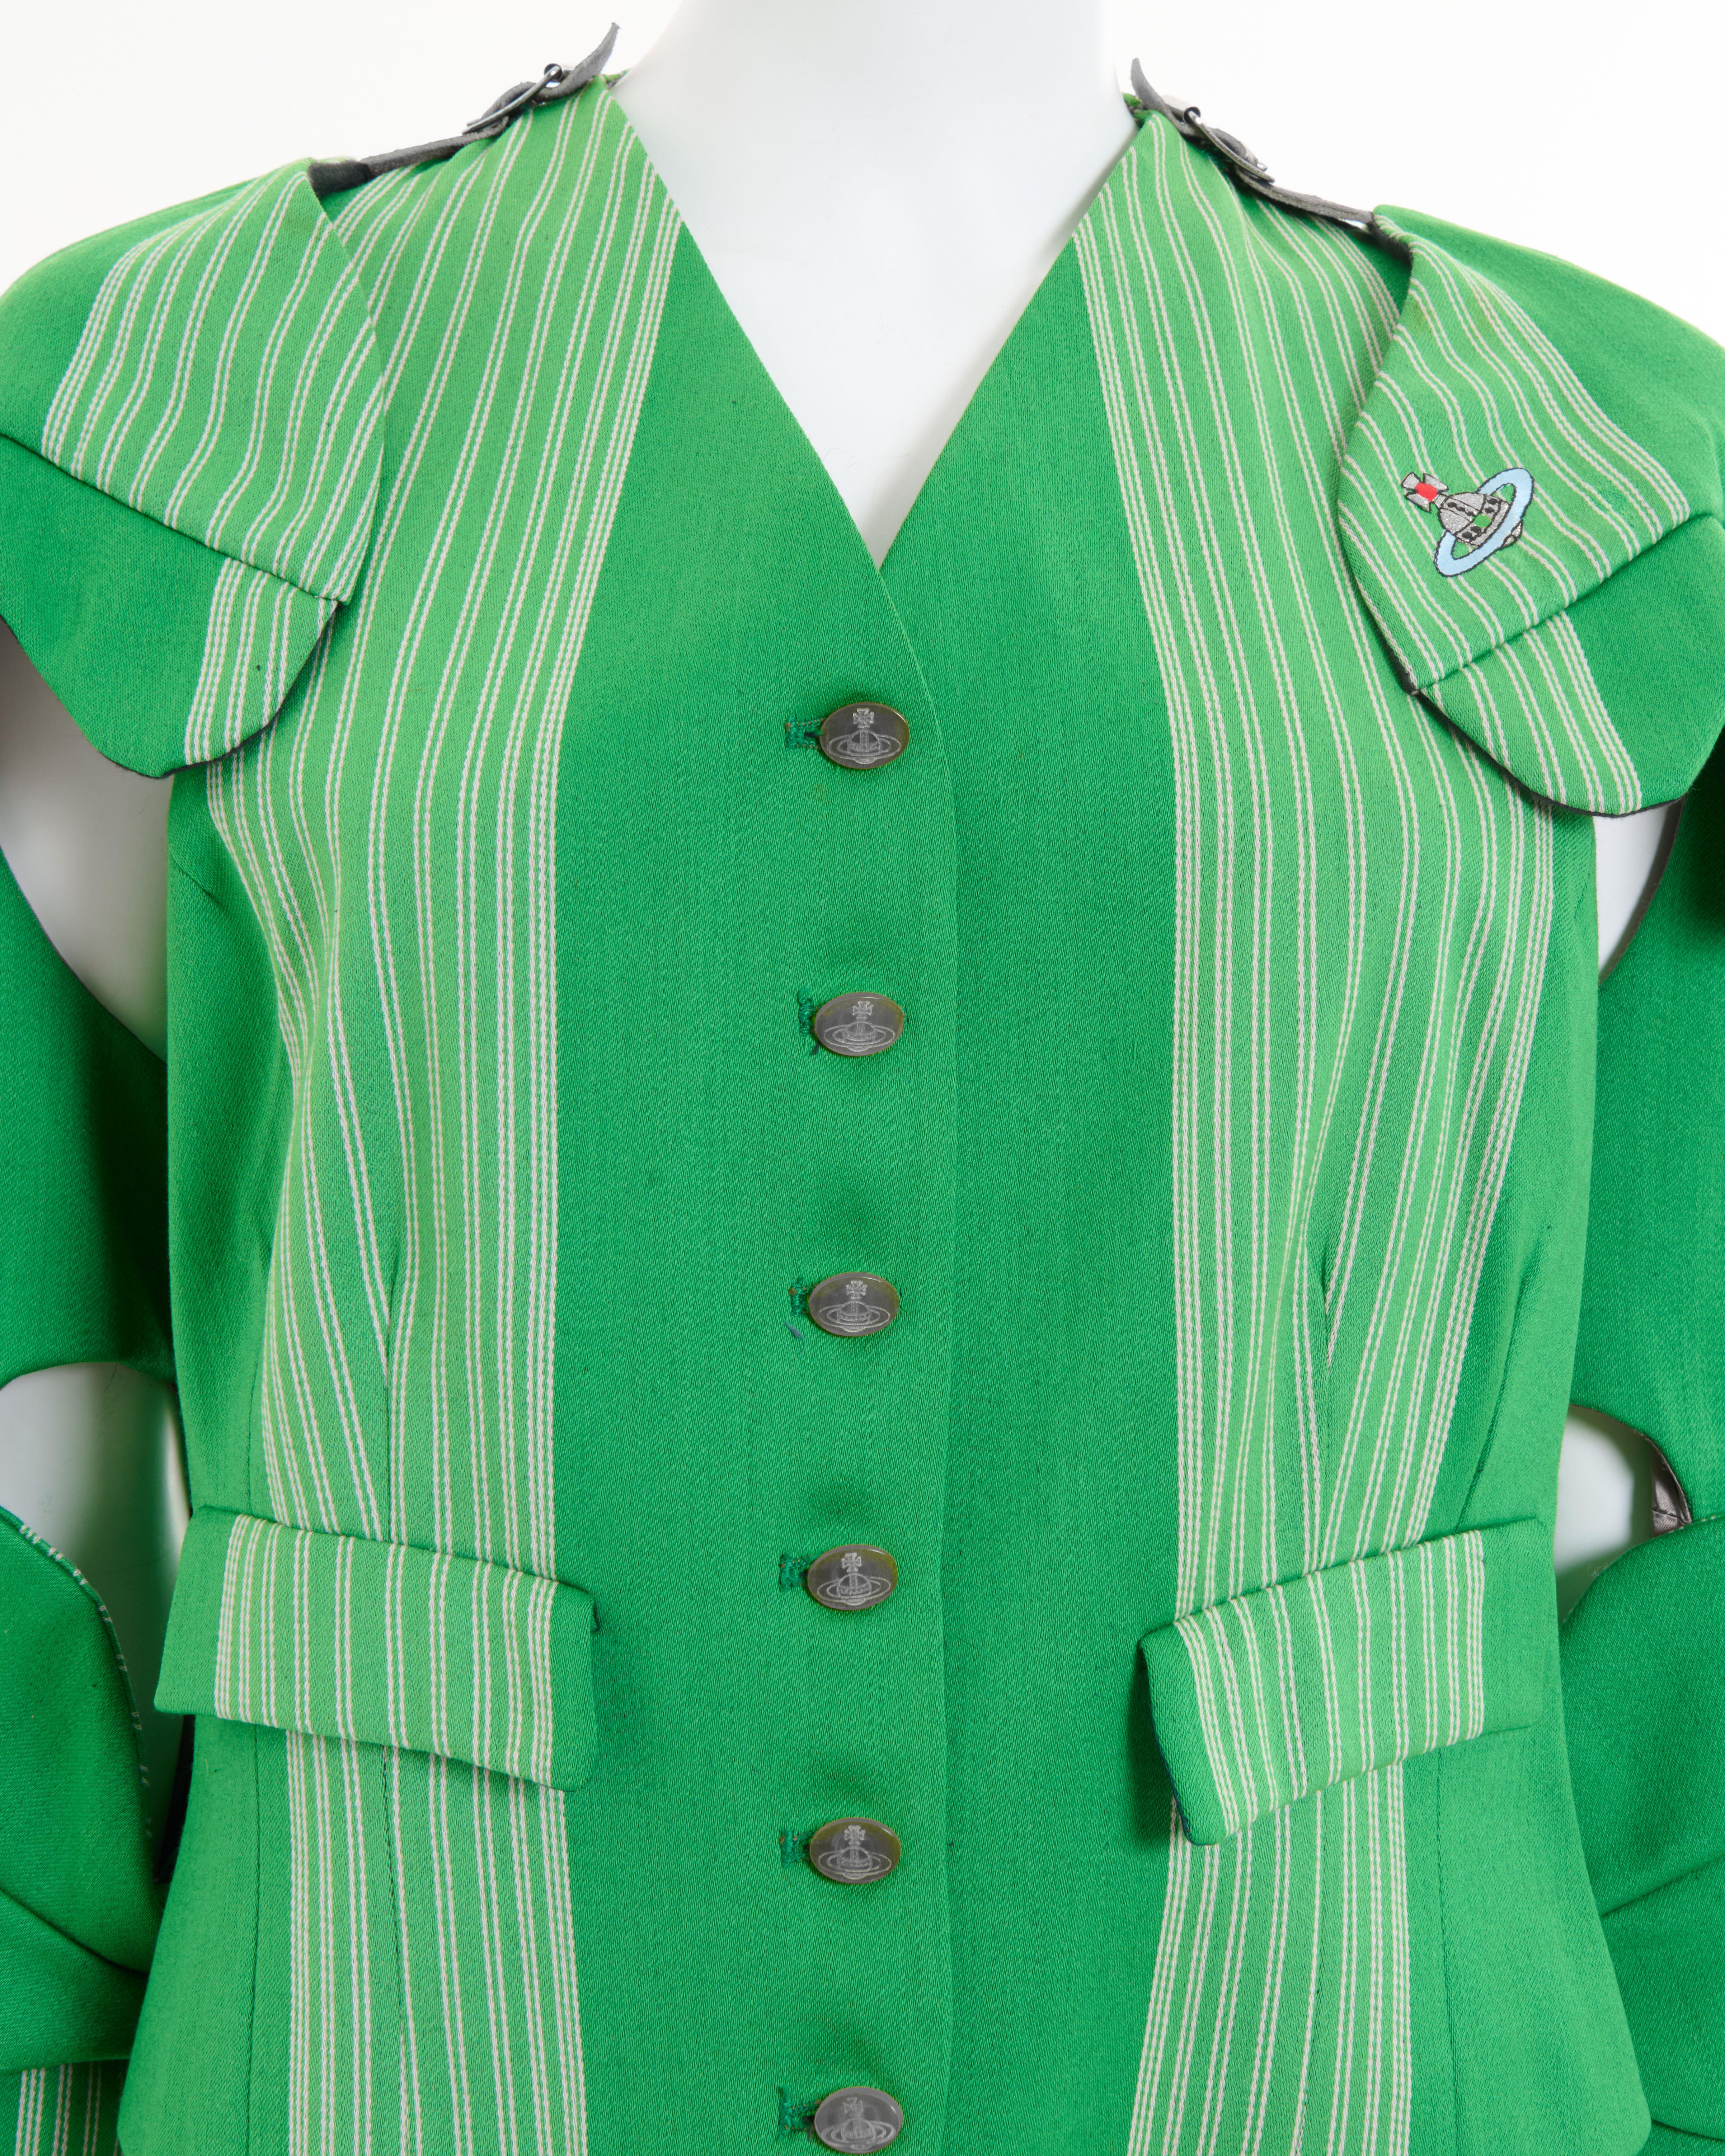 Vivienne Westwood  F/W 1988/89 ‘Time Machine’ Green striped Armour jacket For Sale 4